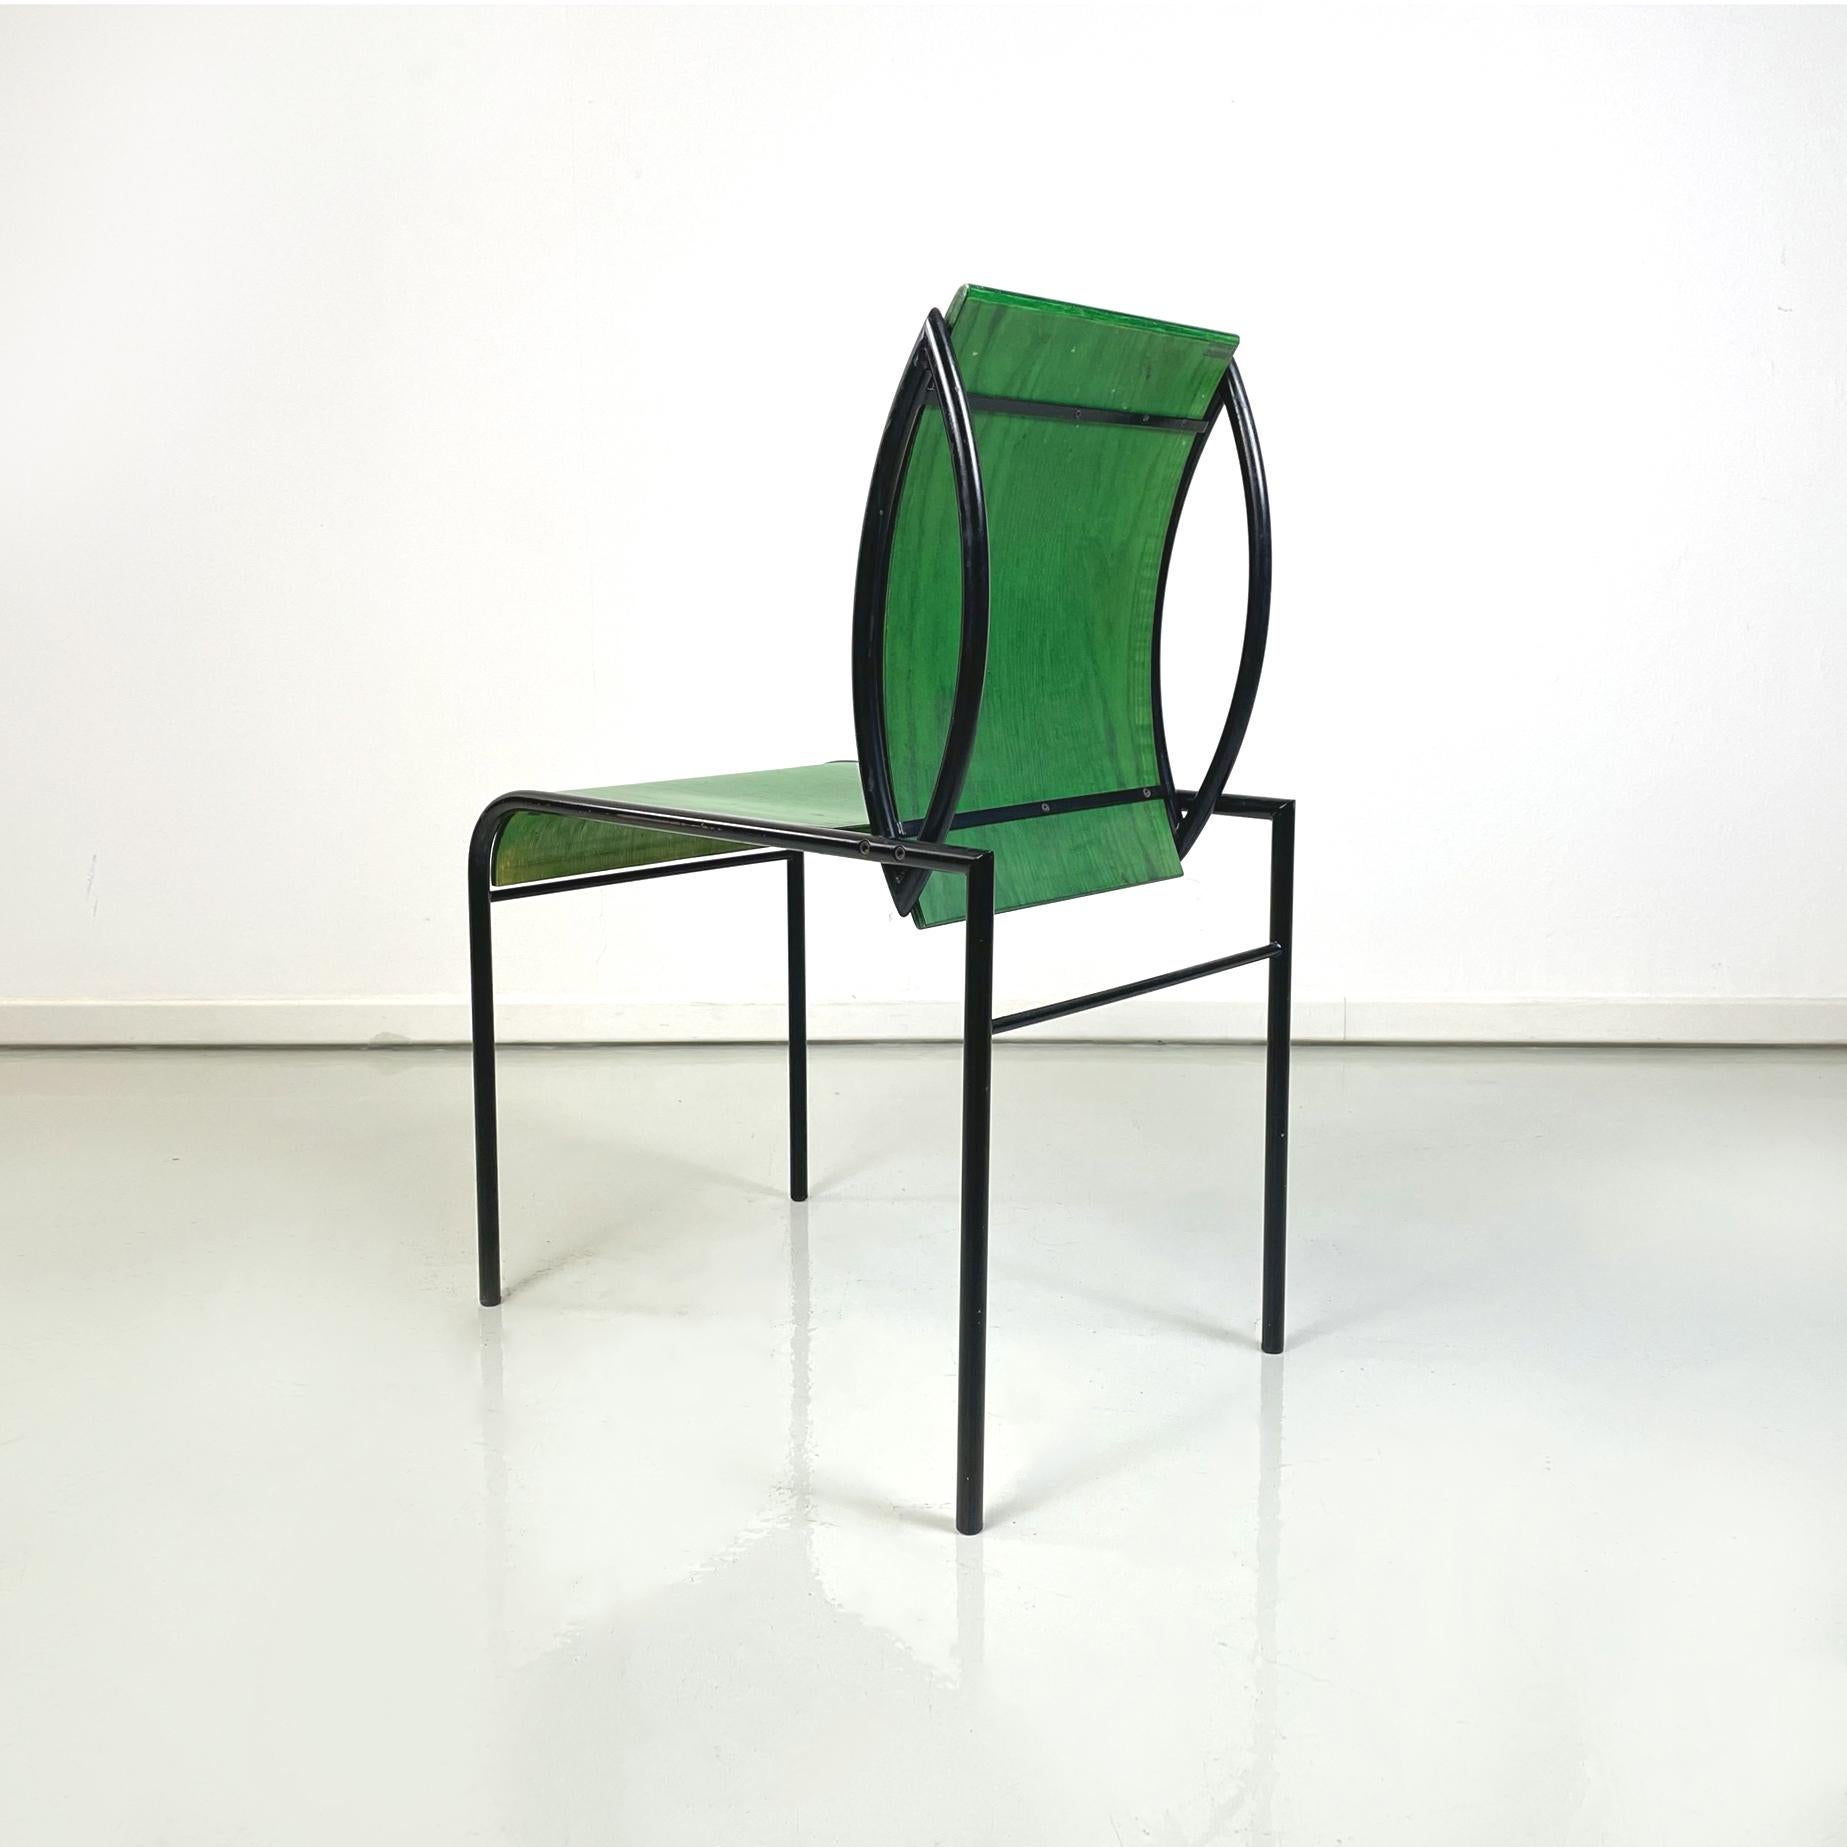 Italian modern Green wood black metal chair Kim by De Lucchi for Memphis, 1980s In Good Condition For Sale In MIlano, IT